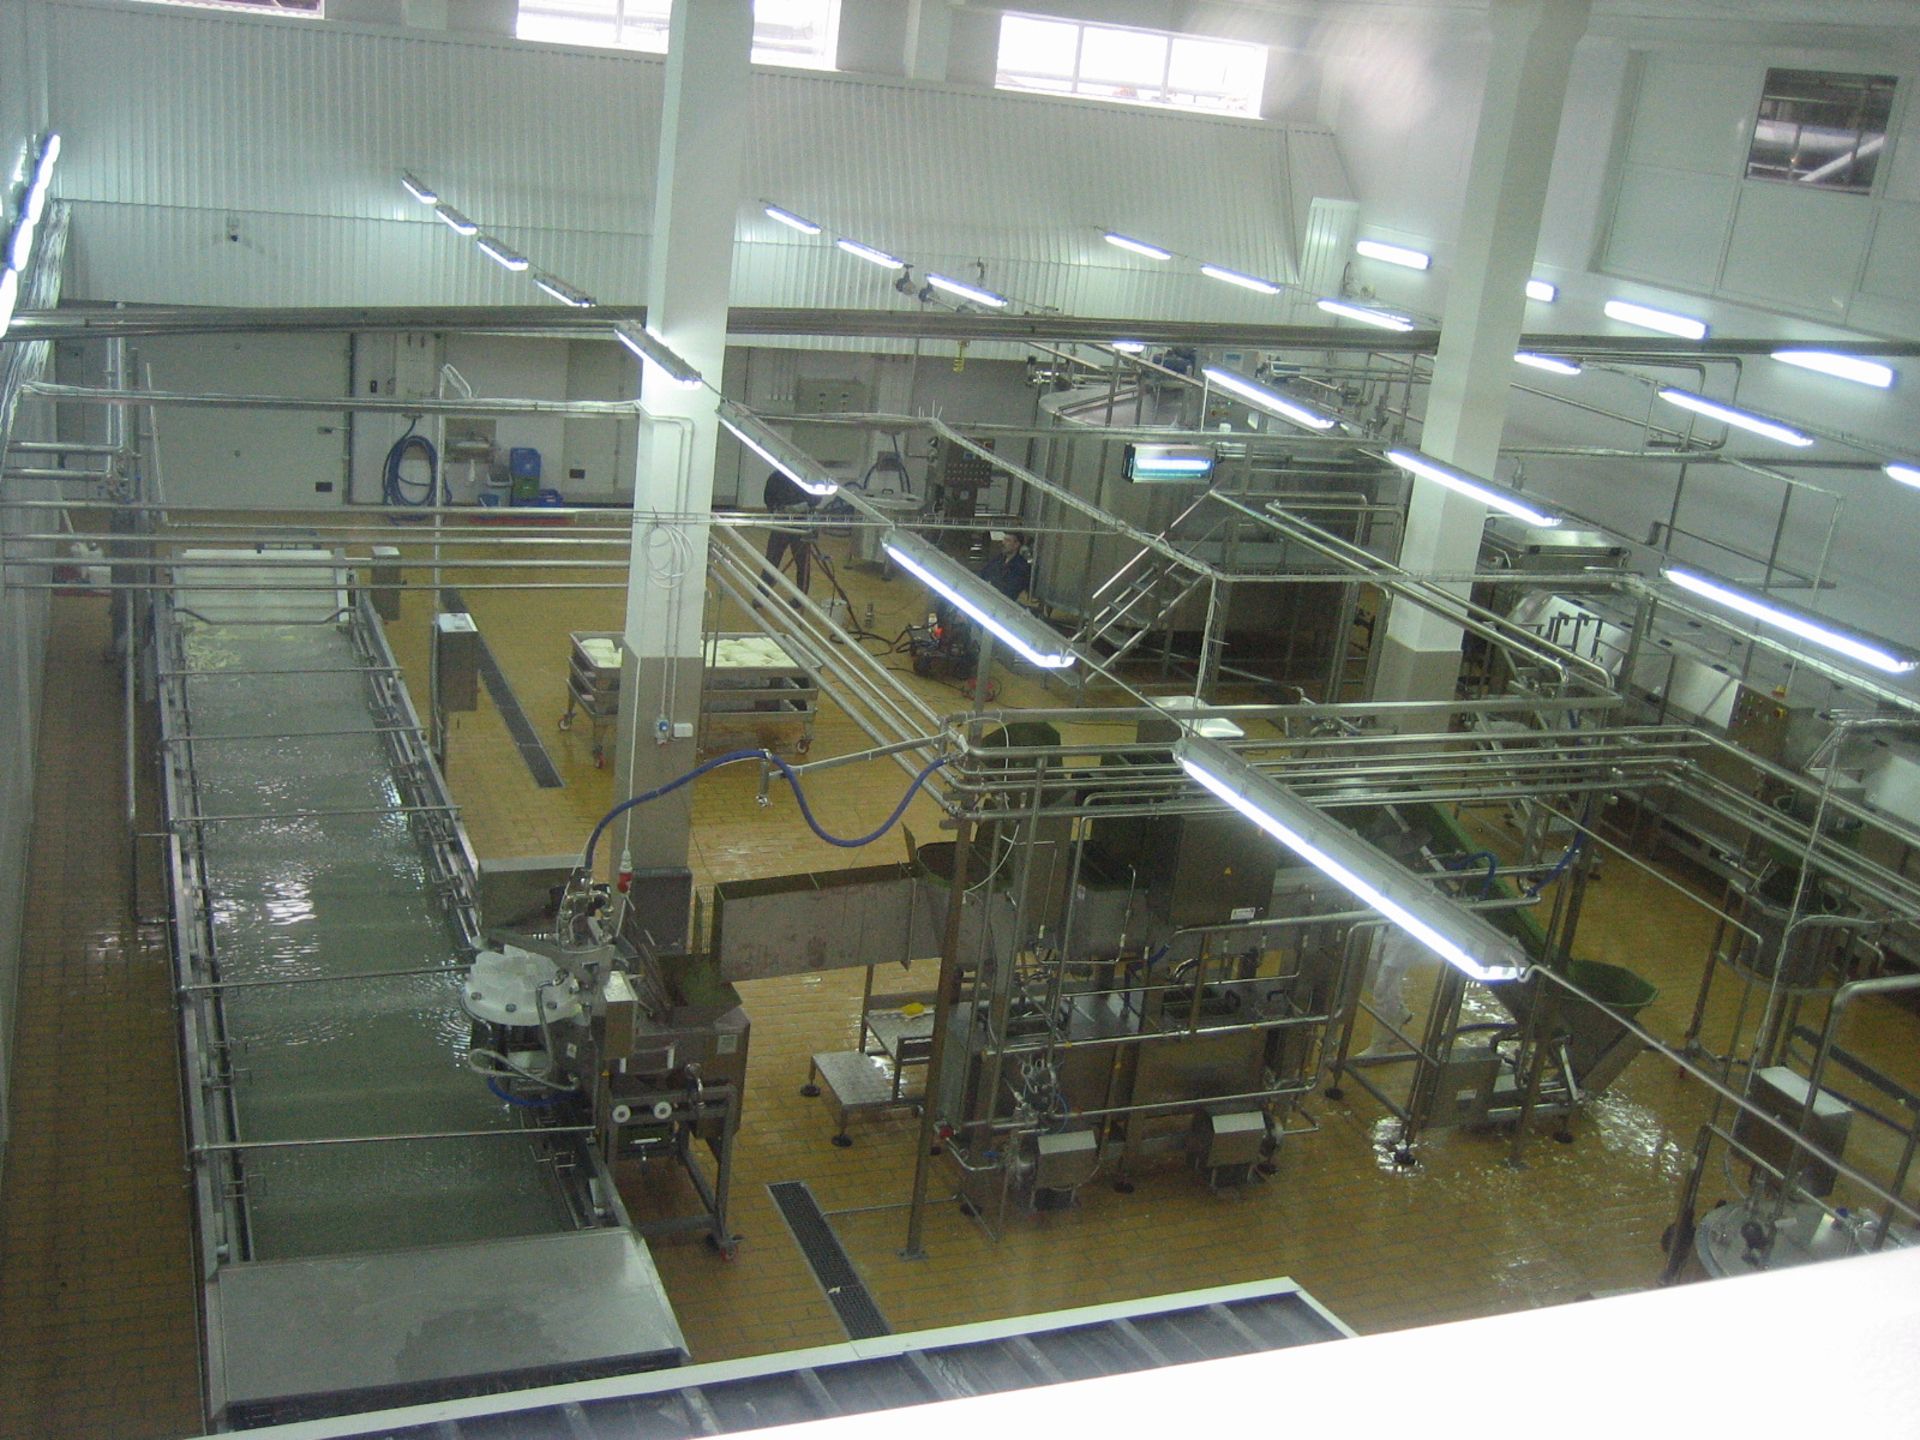 2X COMAT PROCESSING LINES FOR MOZZARELLA CHEESE TO PRODUCE MOZZARELLA STICKS AND MOZZARELLA BLOCKS - Image 2 of 10